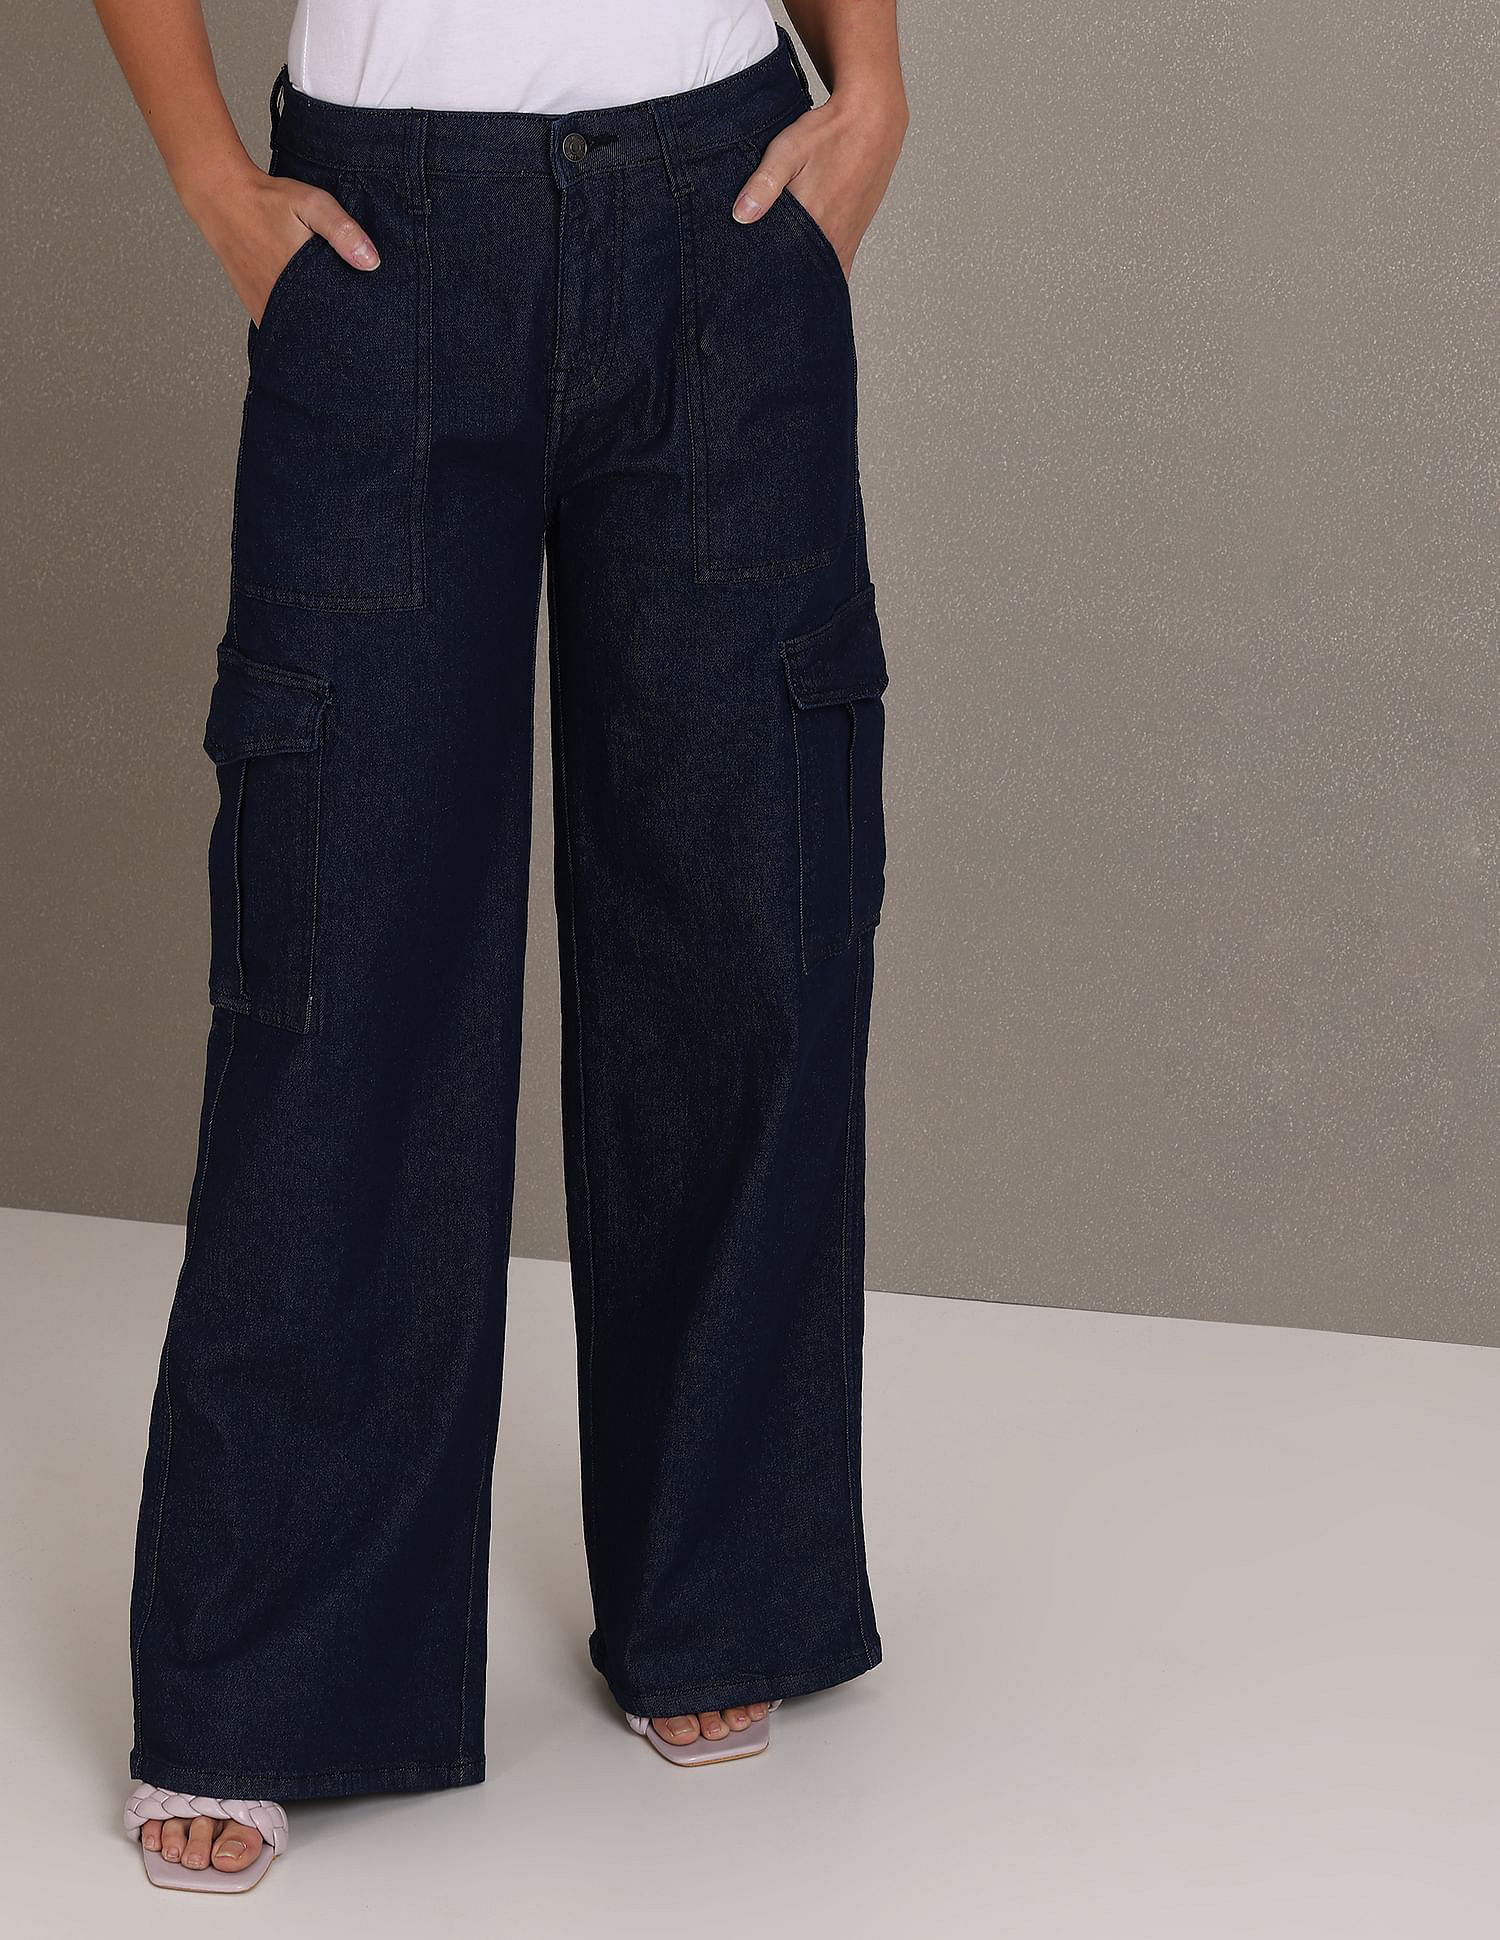 Women Relaxed Fit Cargo Pants